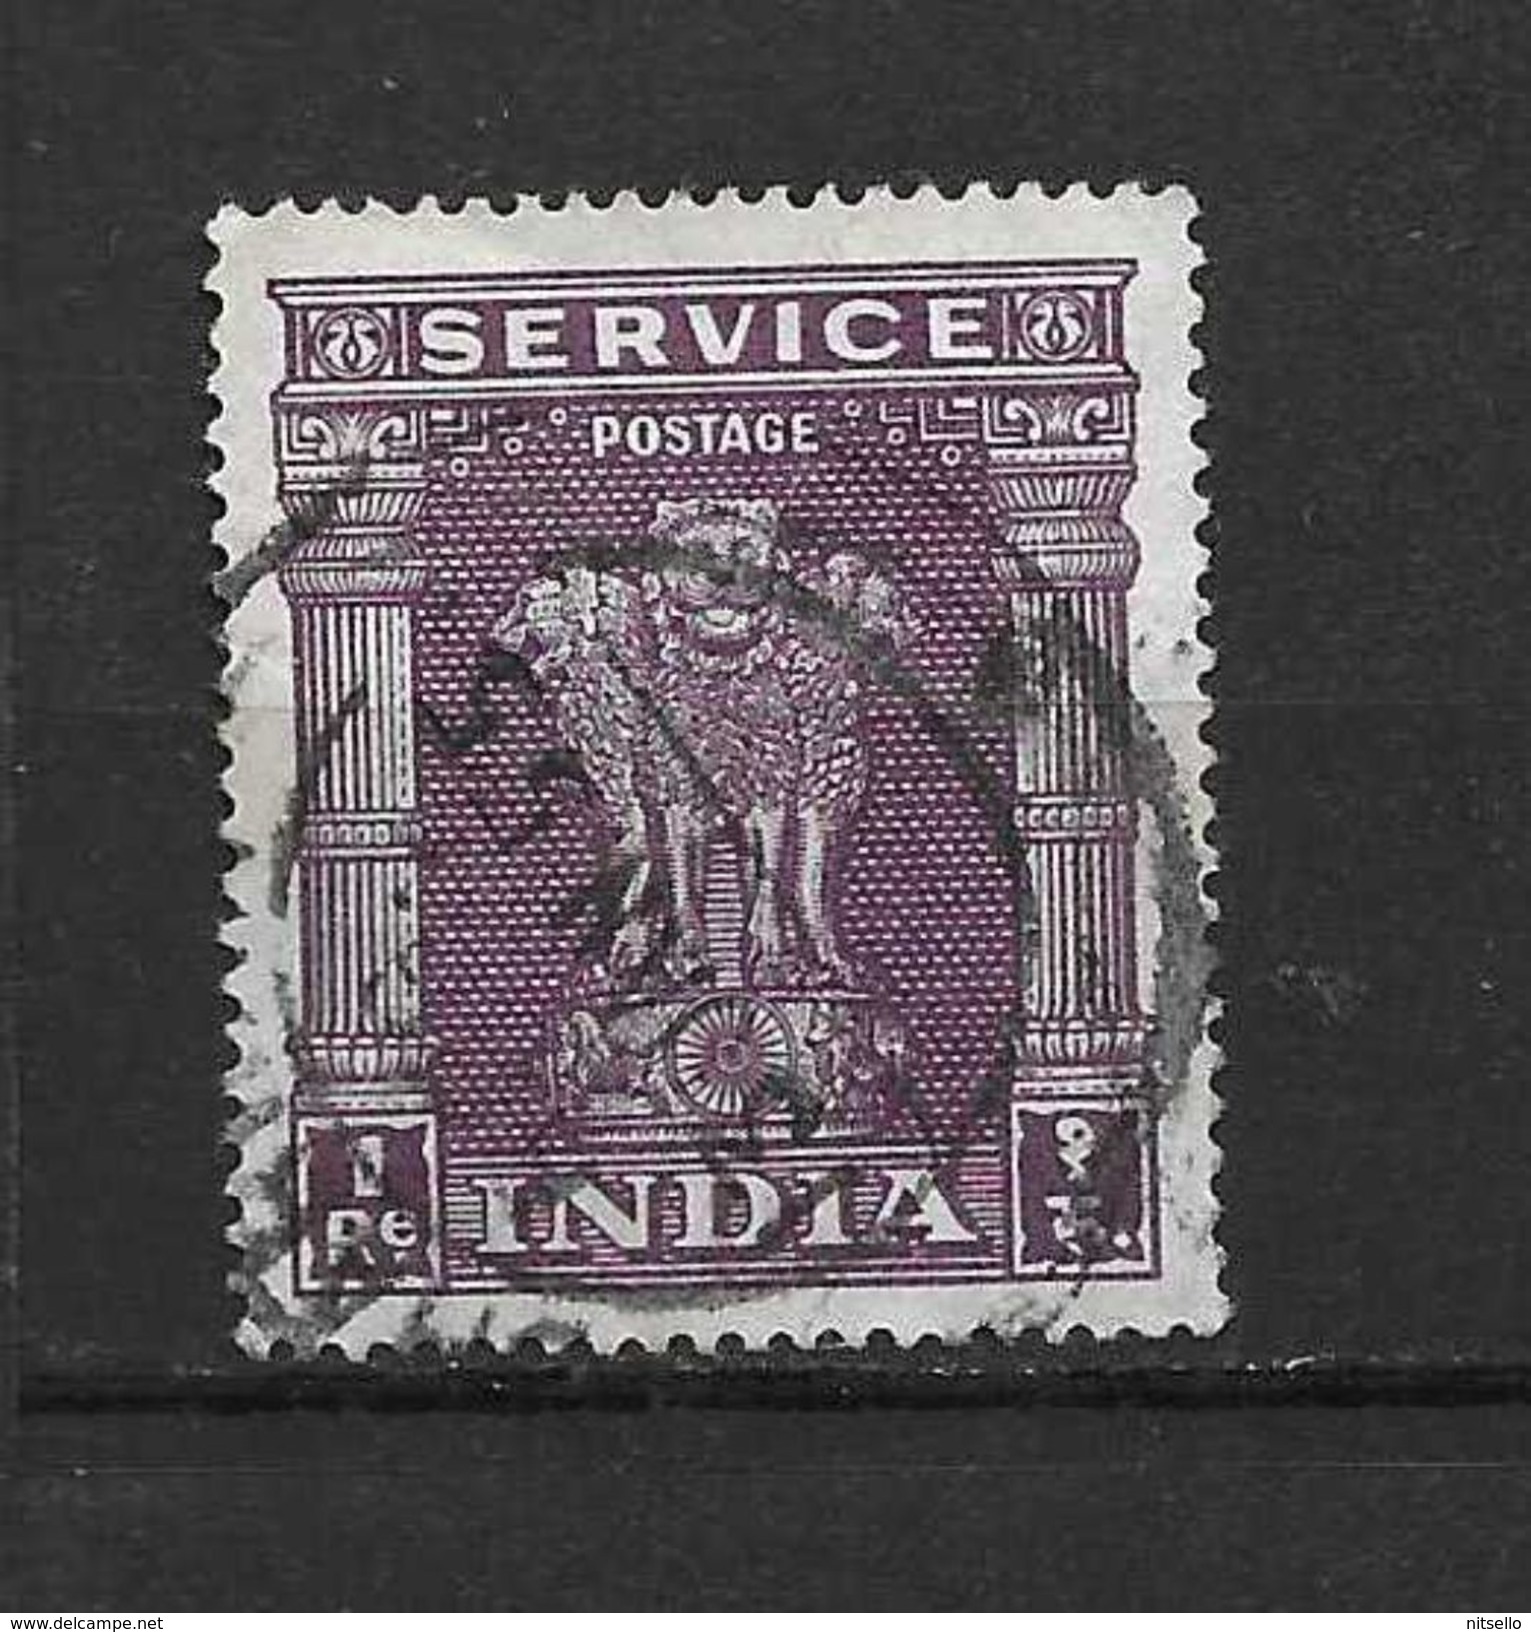 LOTE 1697  ///   INDIA                  ¡¡¡¡ LIQUIDATION !!!!!!! - Official Stamps